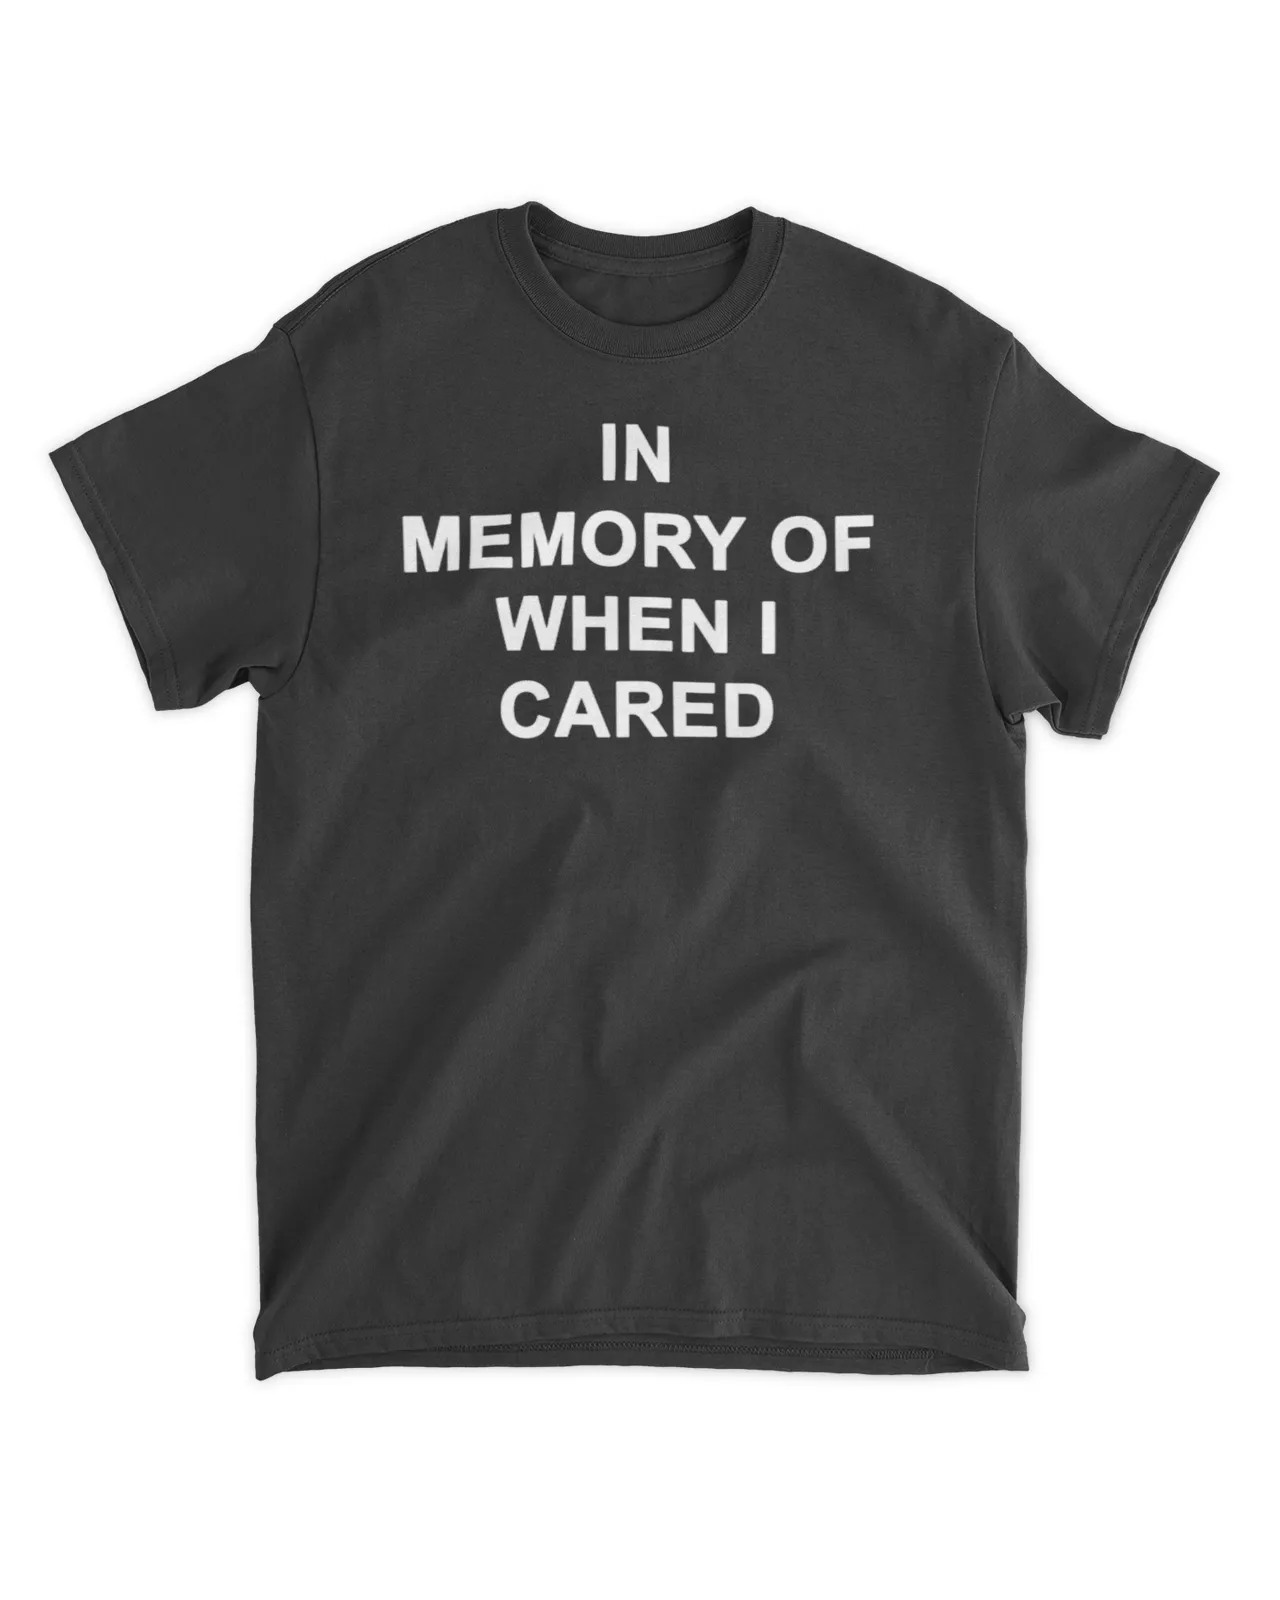  In memory of when I cared shirt